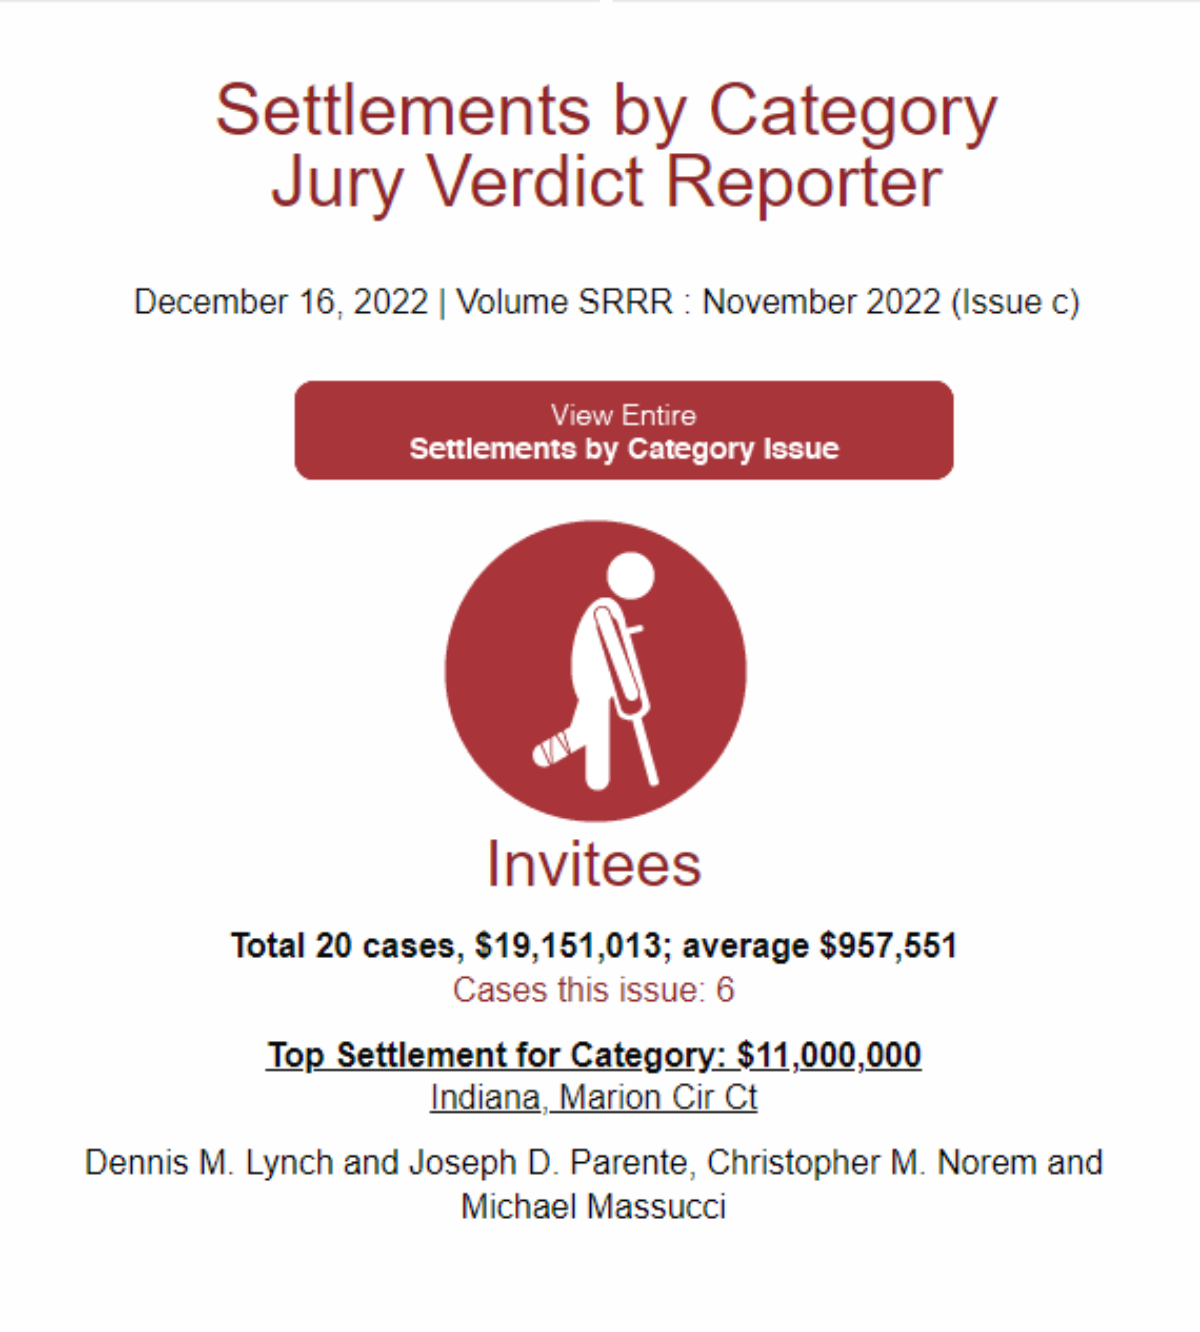 The Law Offices of Parente & Norem, P.C. Achieves Highest Settlement in November 2022